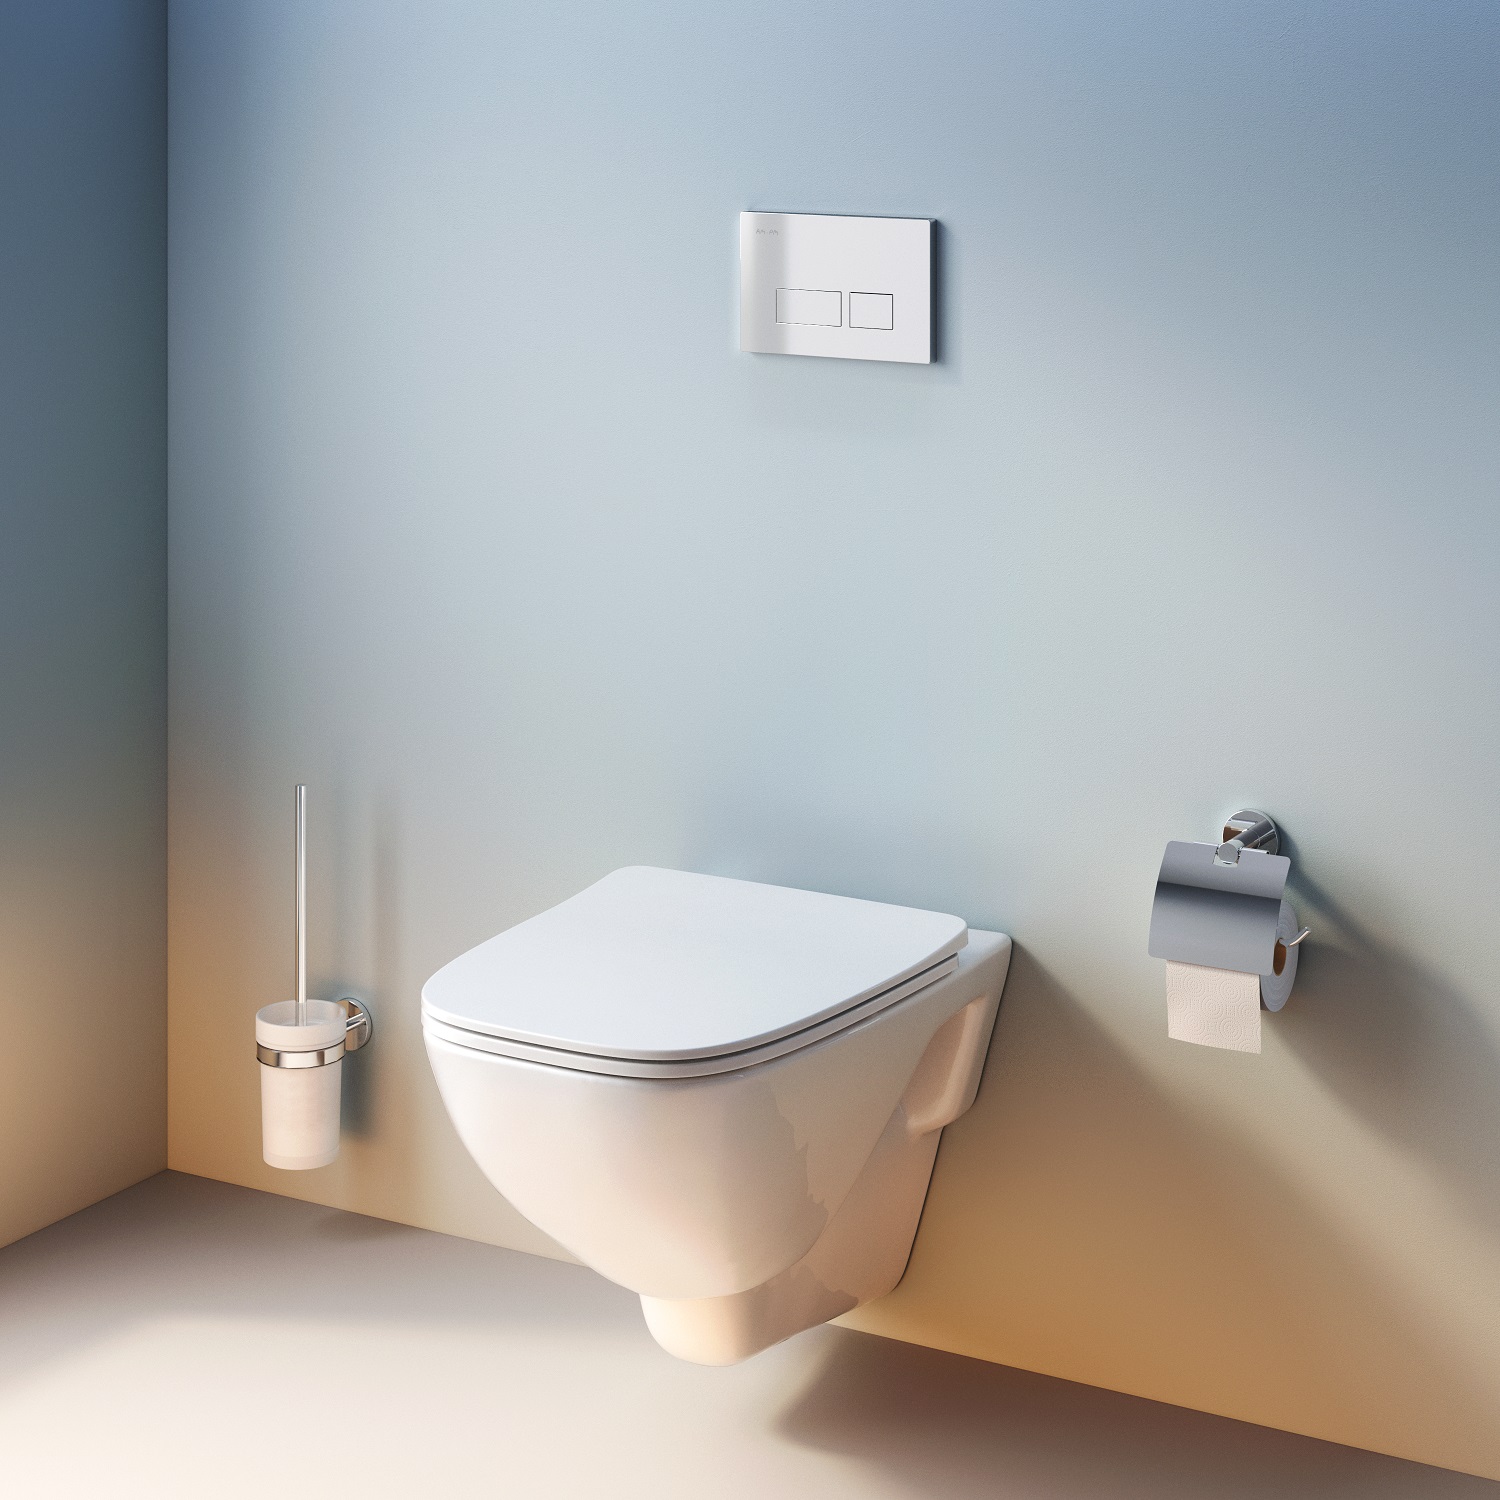 CXA1700SC FlashClean (rimless) wall-mounted toilet with soft-closing seat cover